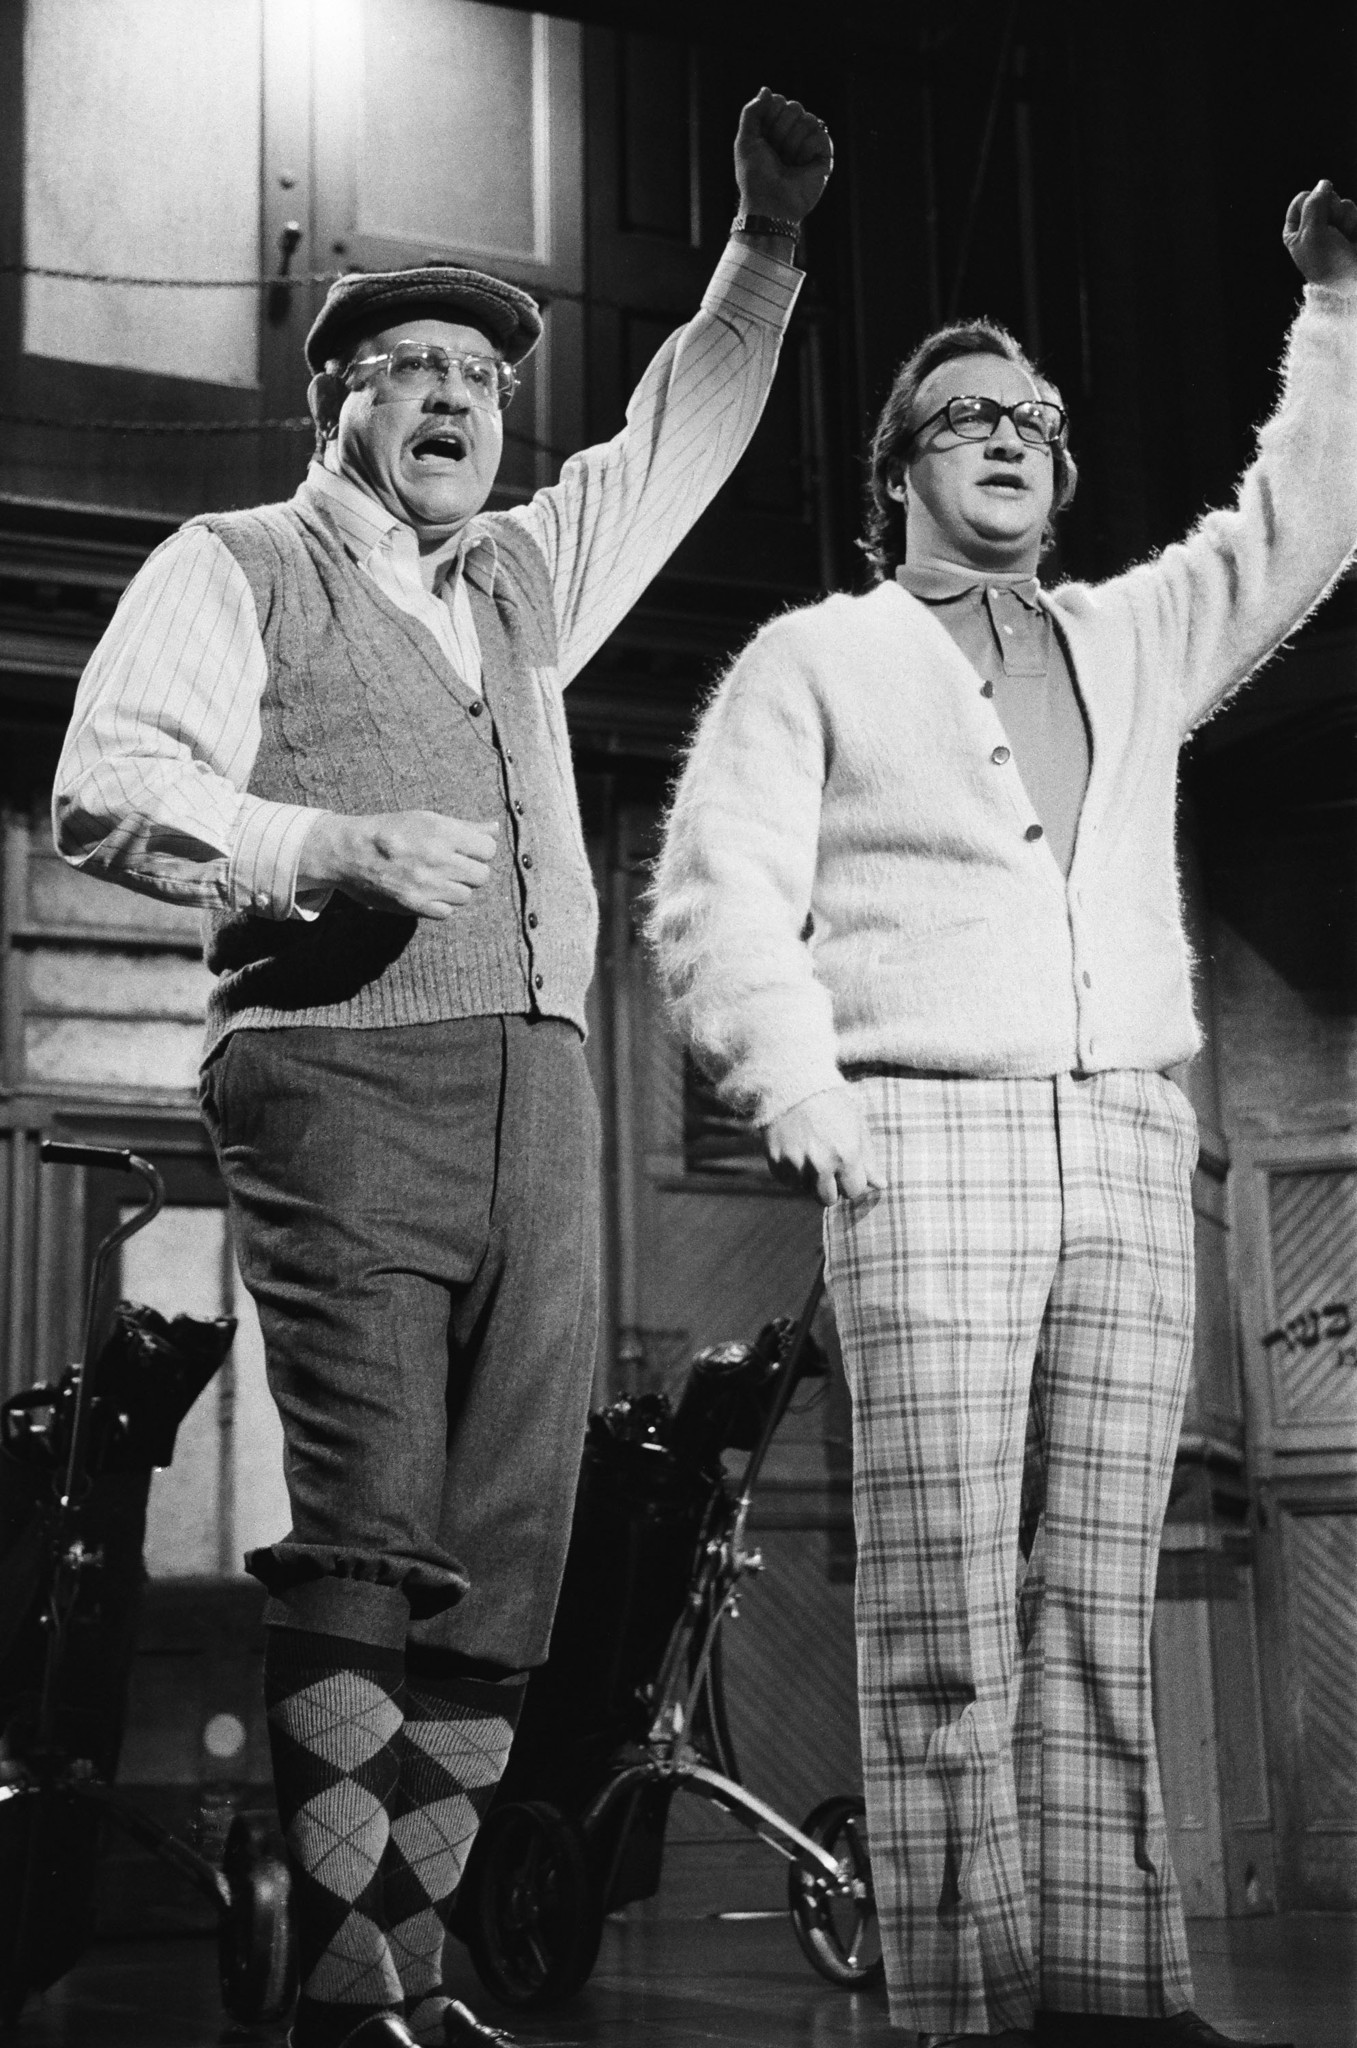 James Belushi and Alex Karras at event of Saturday Night Live (1975)